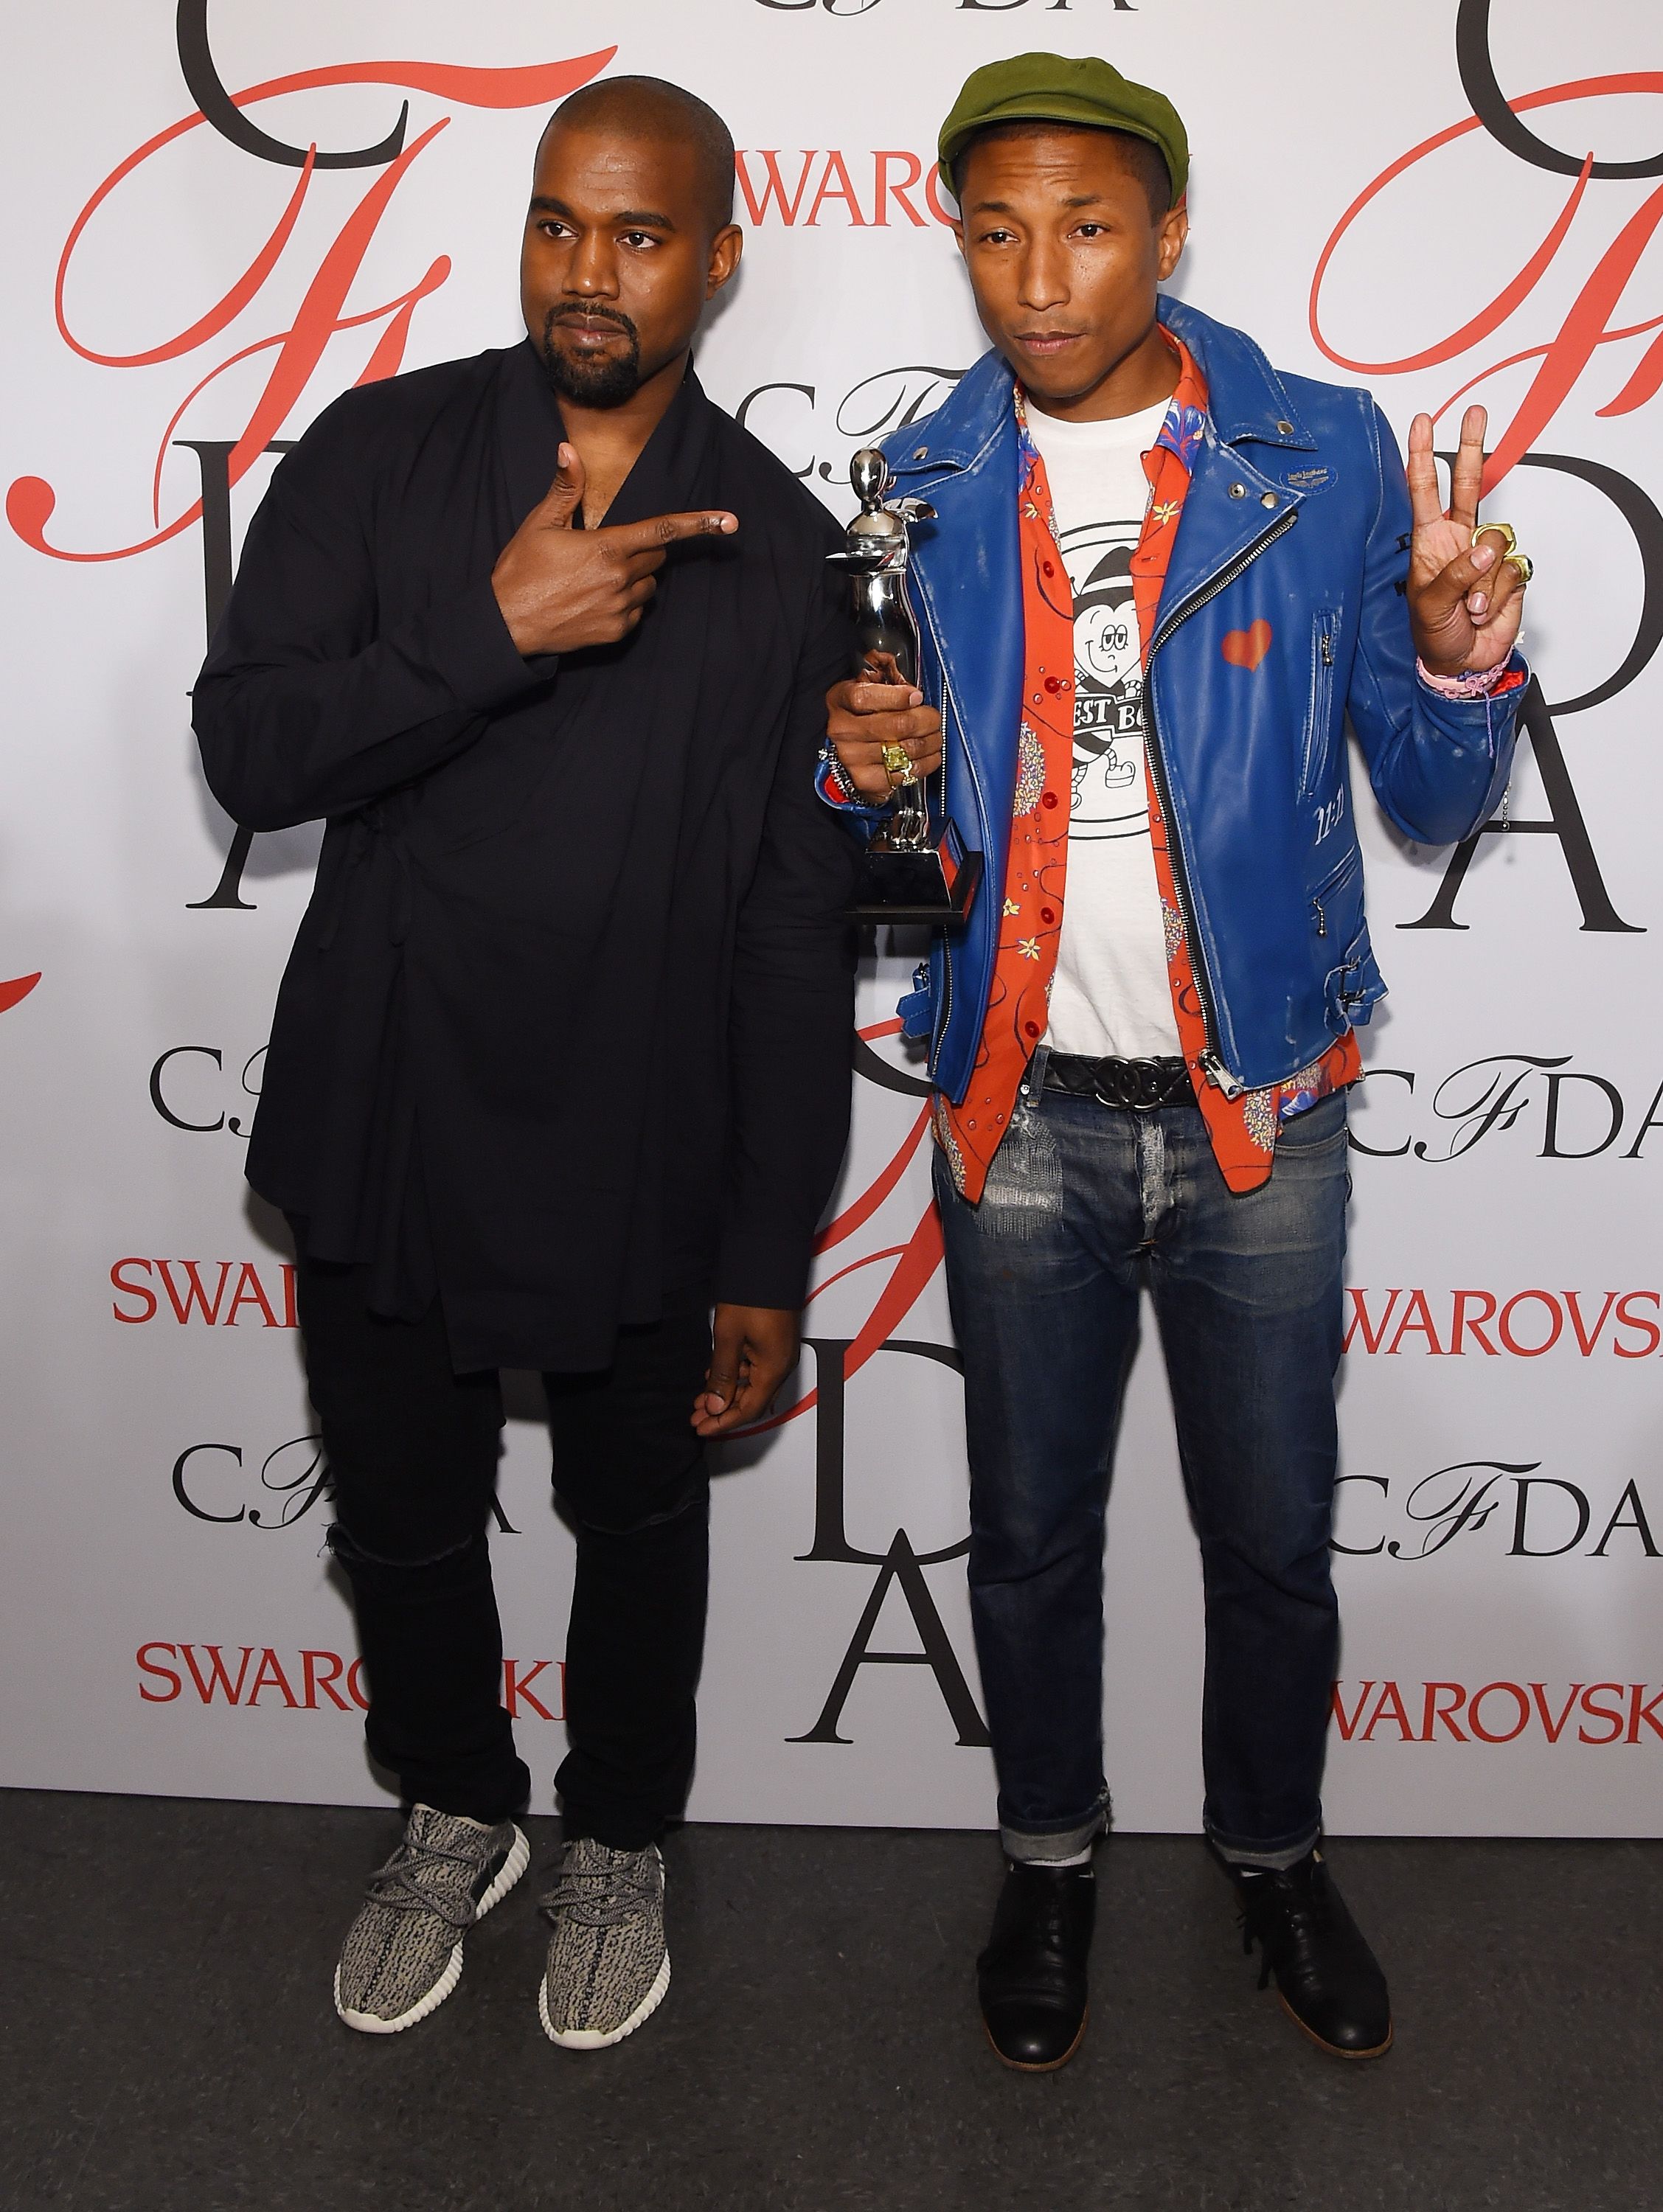 Pharrell Williams Is the Recipient of the CFDA Fashion Icon Award 2015